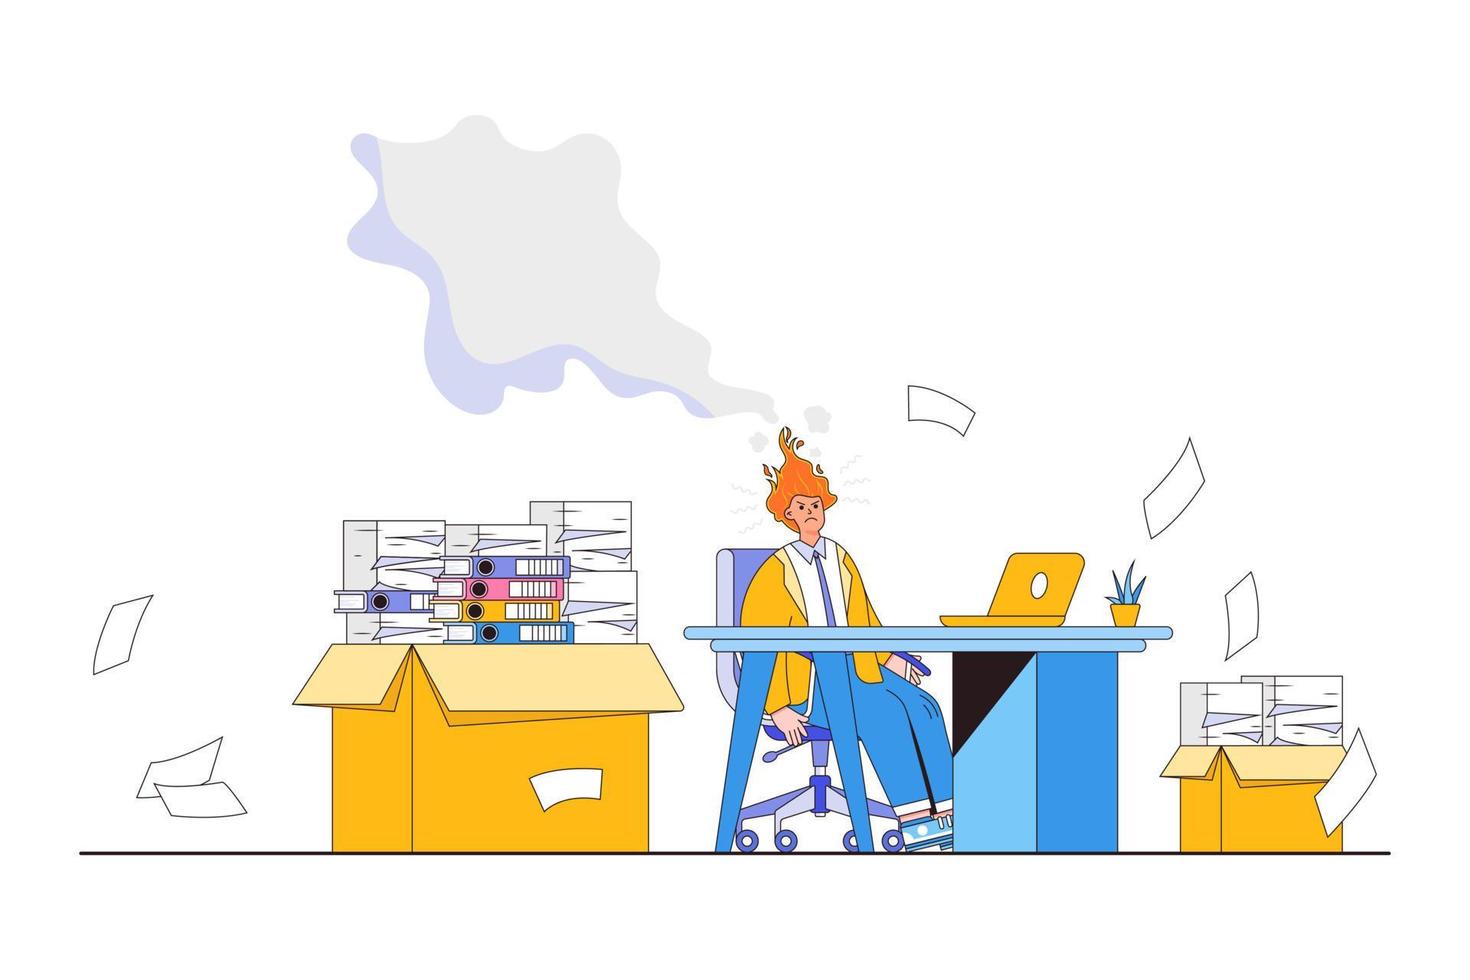 Burnout from overworked, pressure to finish deadline, exhausted worker, stressed employee concepts. Desperate businessman working at desk using laptop with pile of papers and burn heads emit smoke vector